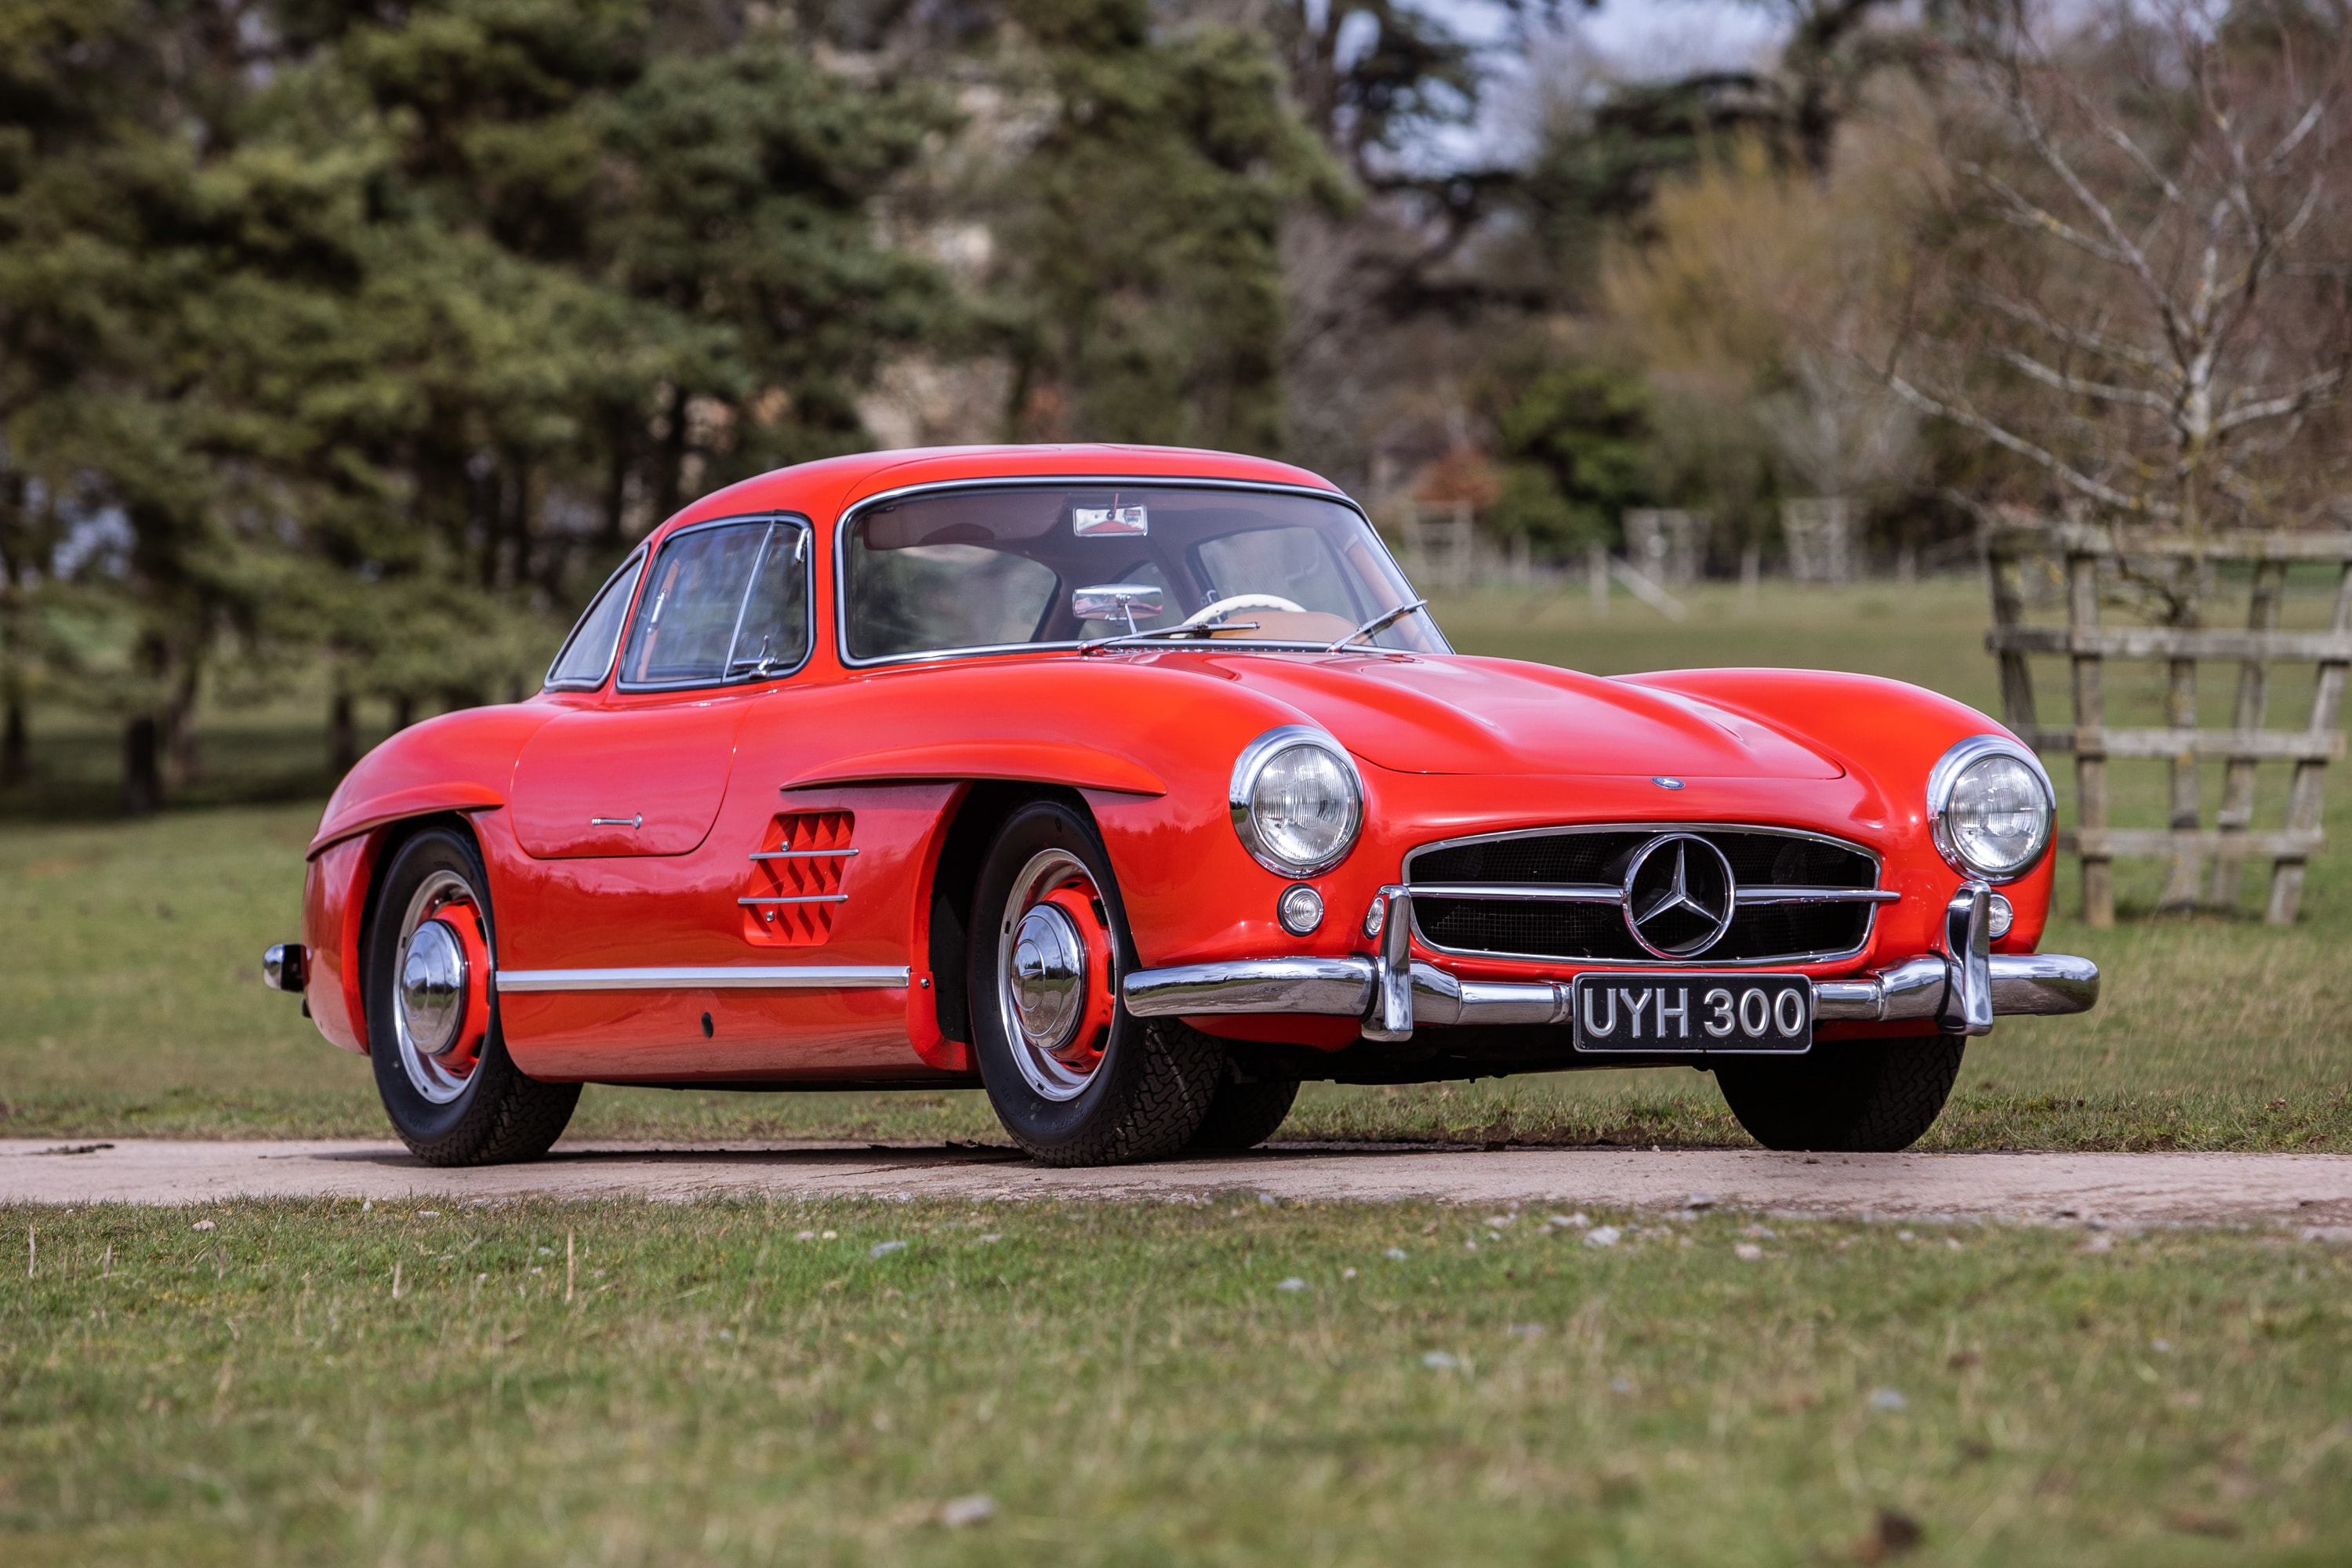 Mercedes-Benz 300SL Gullwing 1954 Fire Engine Red £850,000 - 1,000,000 GBP Estimation 1980404500118 Chassis Classic Sporting Motor Car German Vintage Rare Sportscar